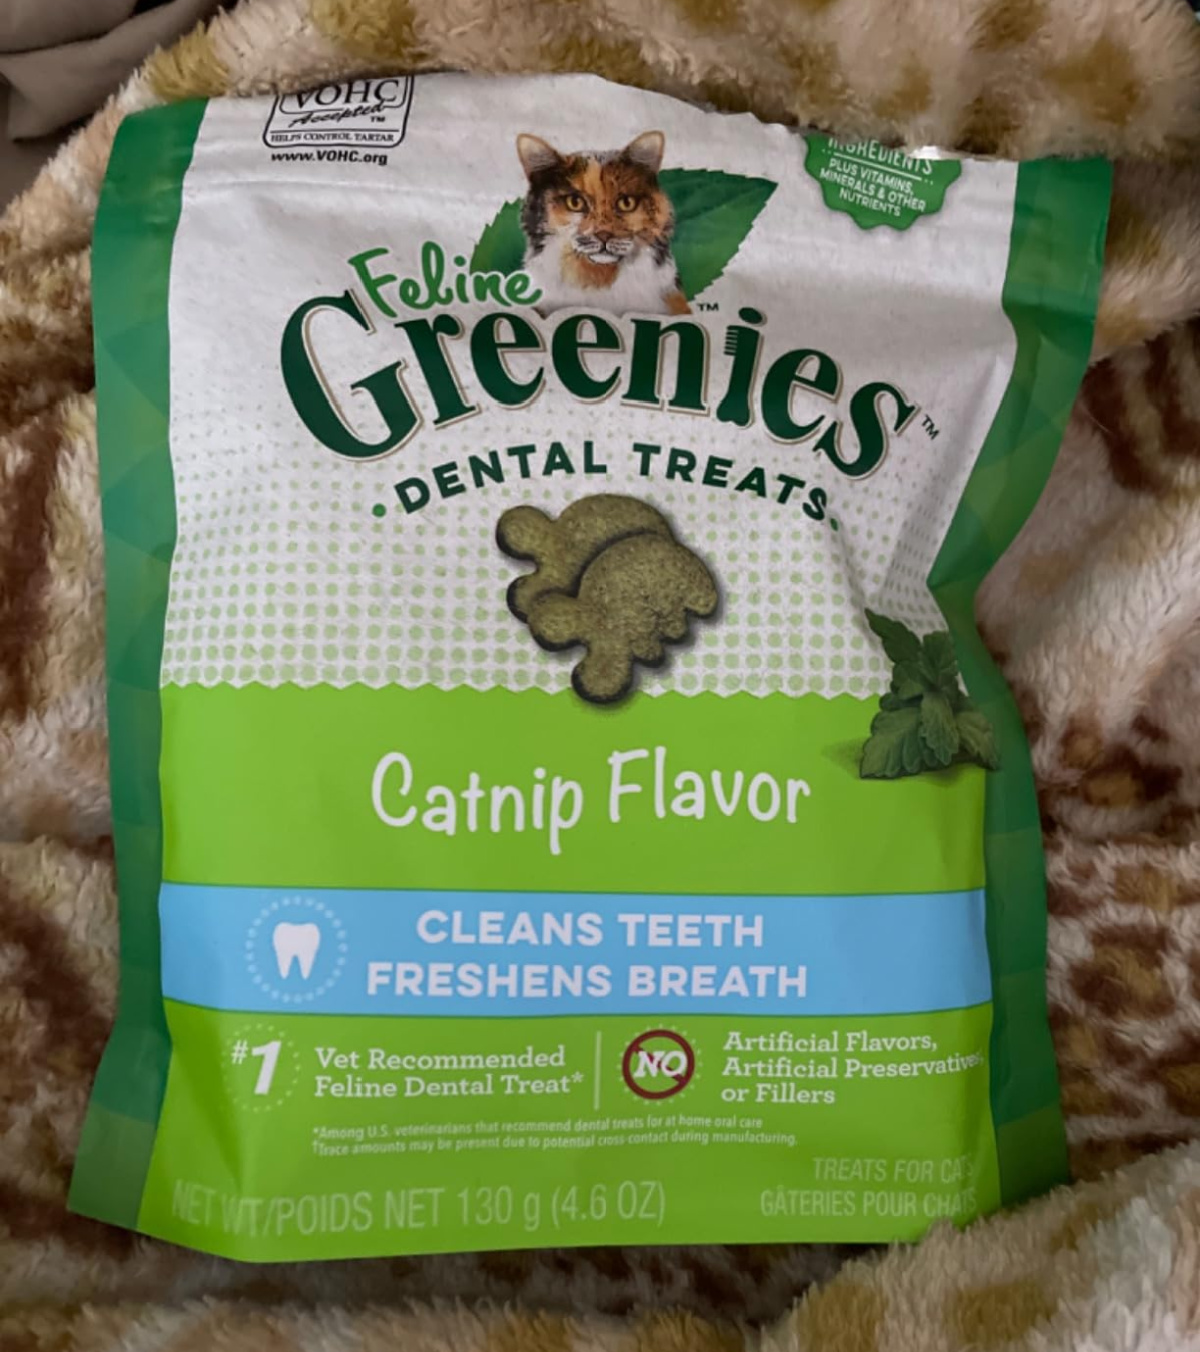 Greenies for Cats in the catnip flavor is one of the best amazon stocking stuffers for cats